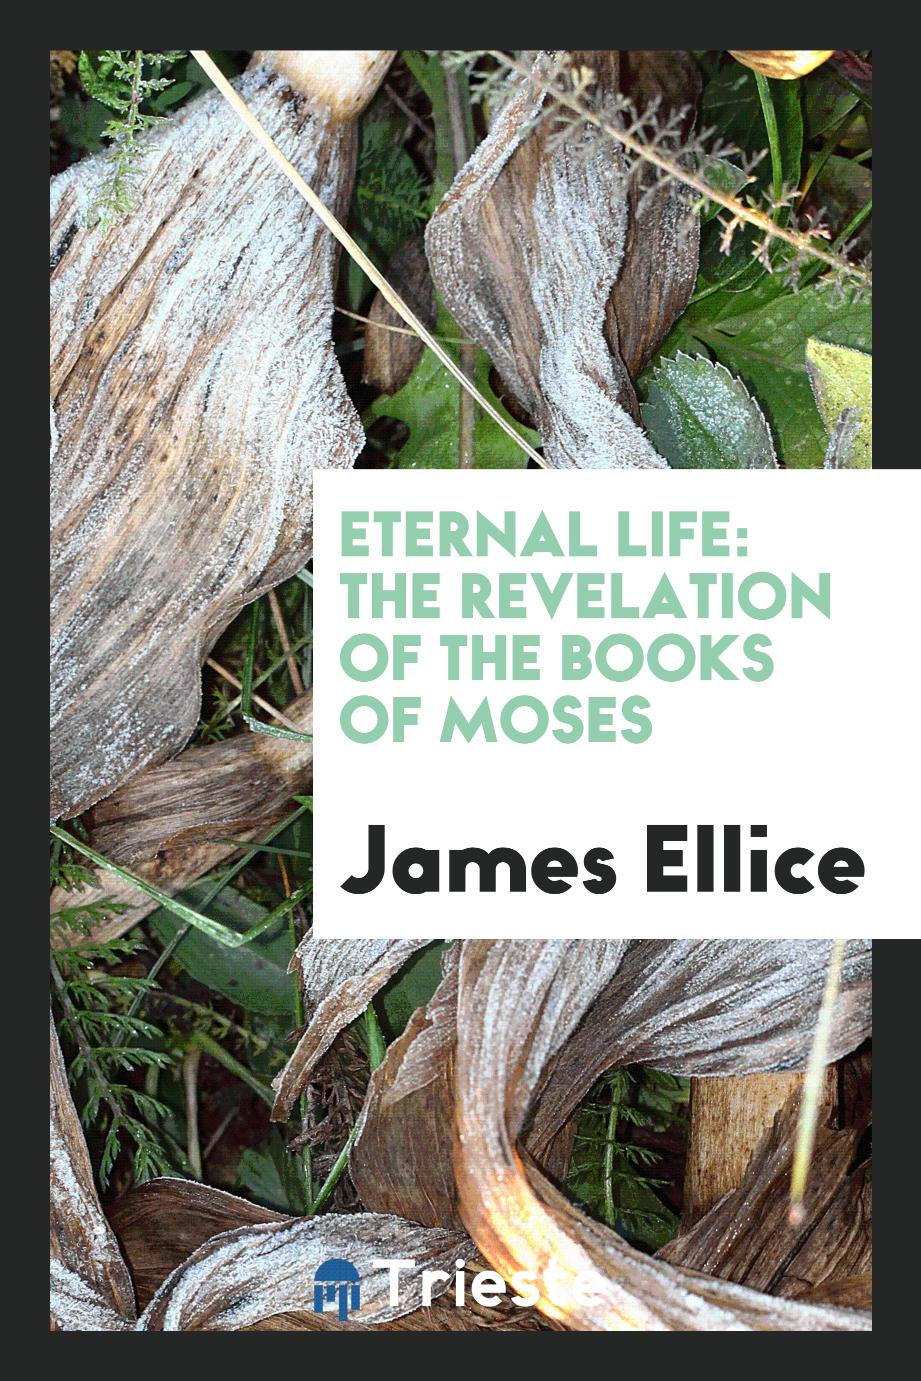 James Ellice - Eternal Life: The Revelation of the Books of Moses